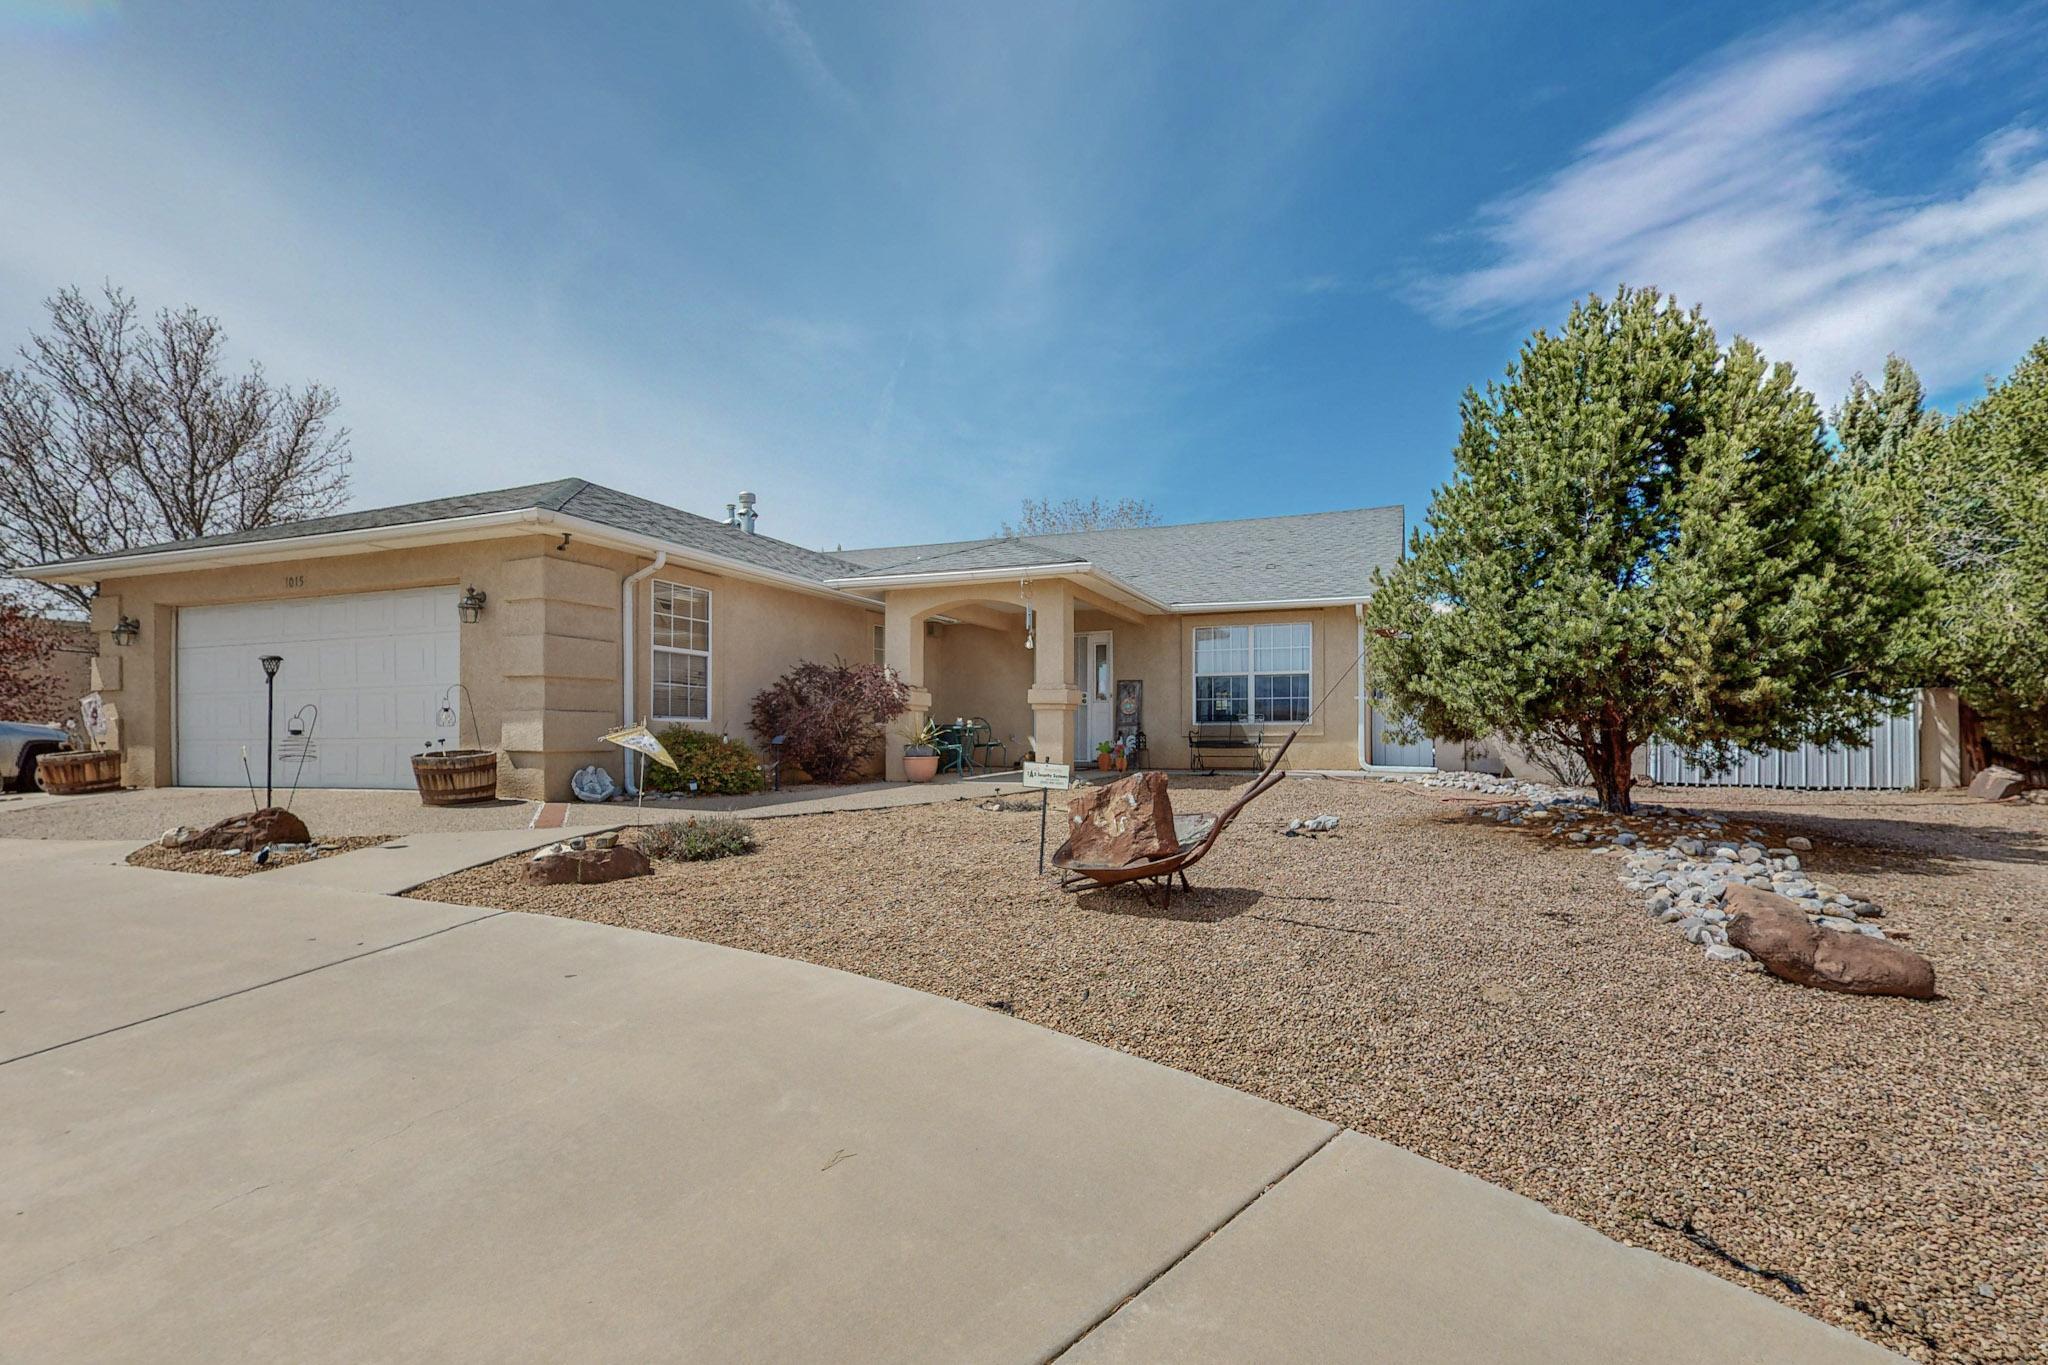 Here is the one you have been waiting for! A custom ranch on 0.5 acre in one of the most desirable neighborhoods in Los Lunas. The open floorplan is light and bright offering so much space to gather and enjoy time with friends and family. Raised ceilings, newer flooring, nearly new cooktop in the kitchen and a sunroom are all wonderful features. A finished 24x30 detached garage/workshop plus 20x30 carport are in addition to the attached 2 gar garage, making this a dream for the hobbyist needing space for toys, projects, storage, etc. Backyard access and huge backyard with trees, grass, and a large open patio. Mountain views from the fully landscaped front yard are gorgeous!